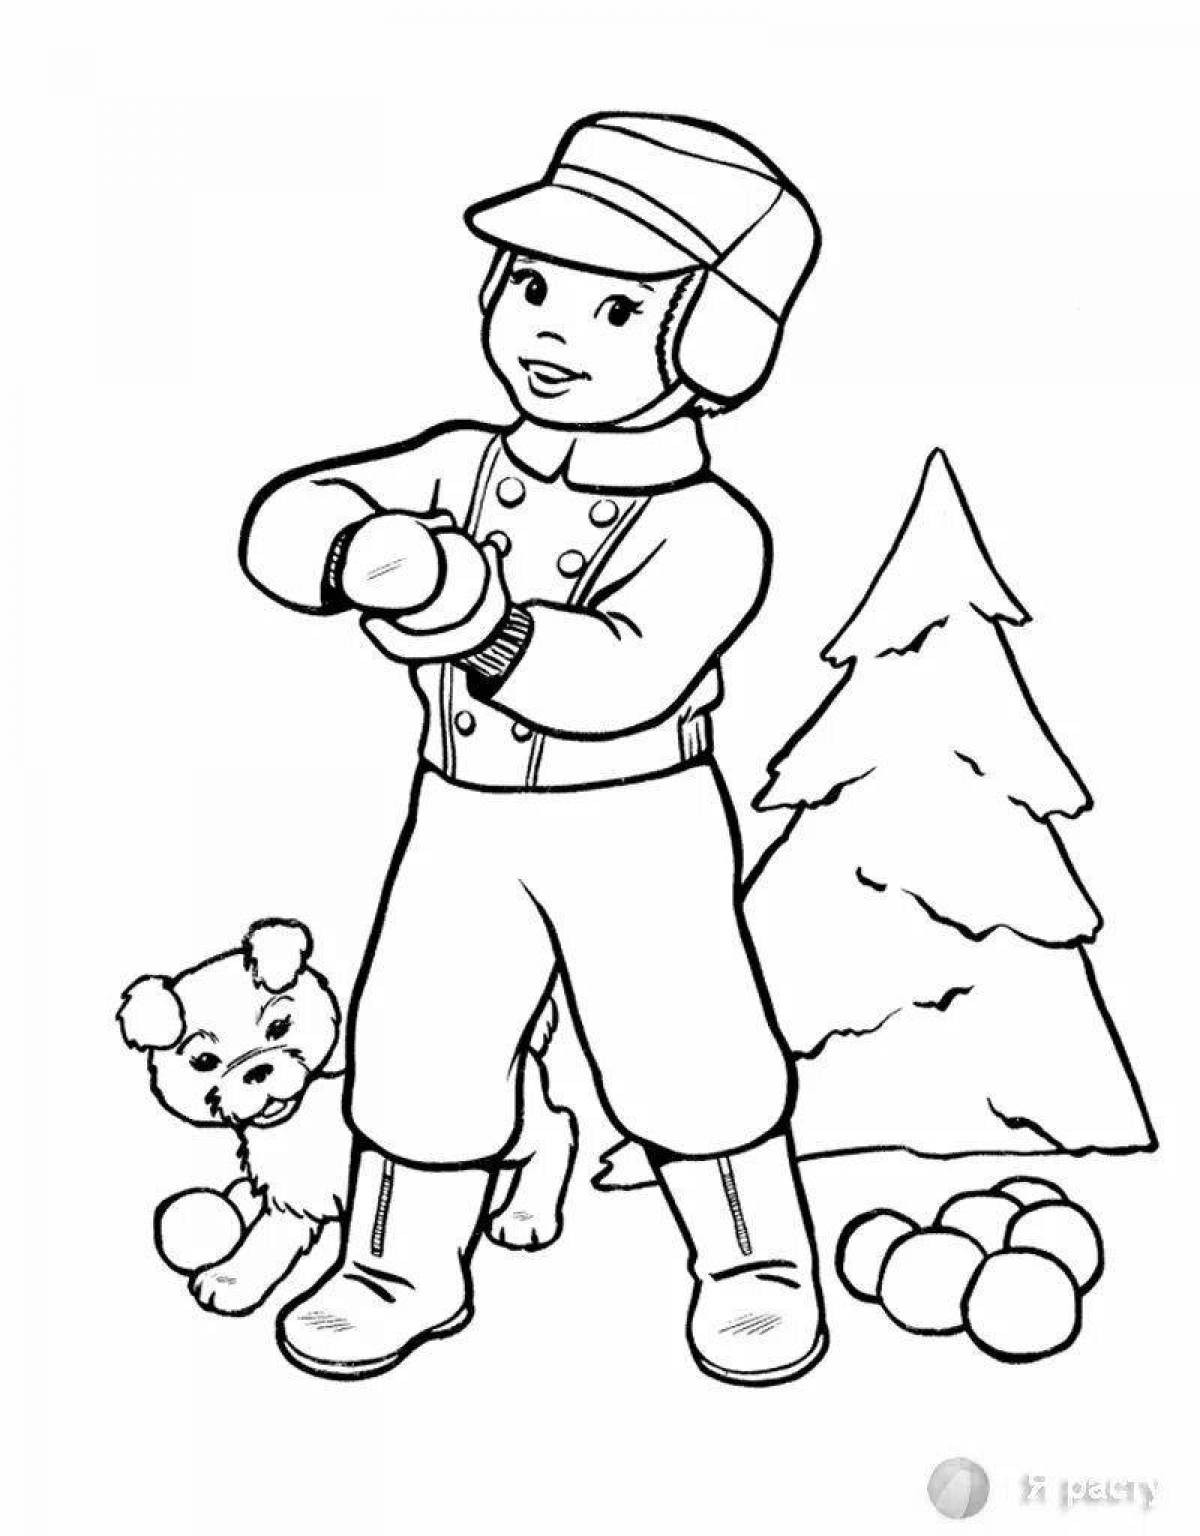 Coloring book magical snowball fight